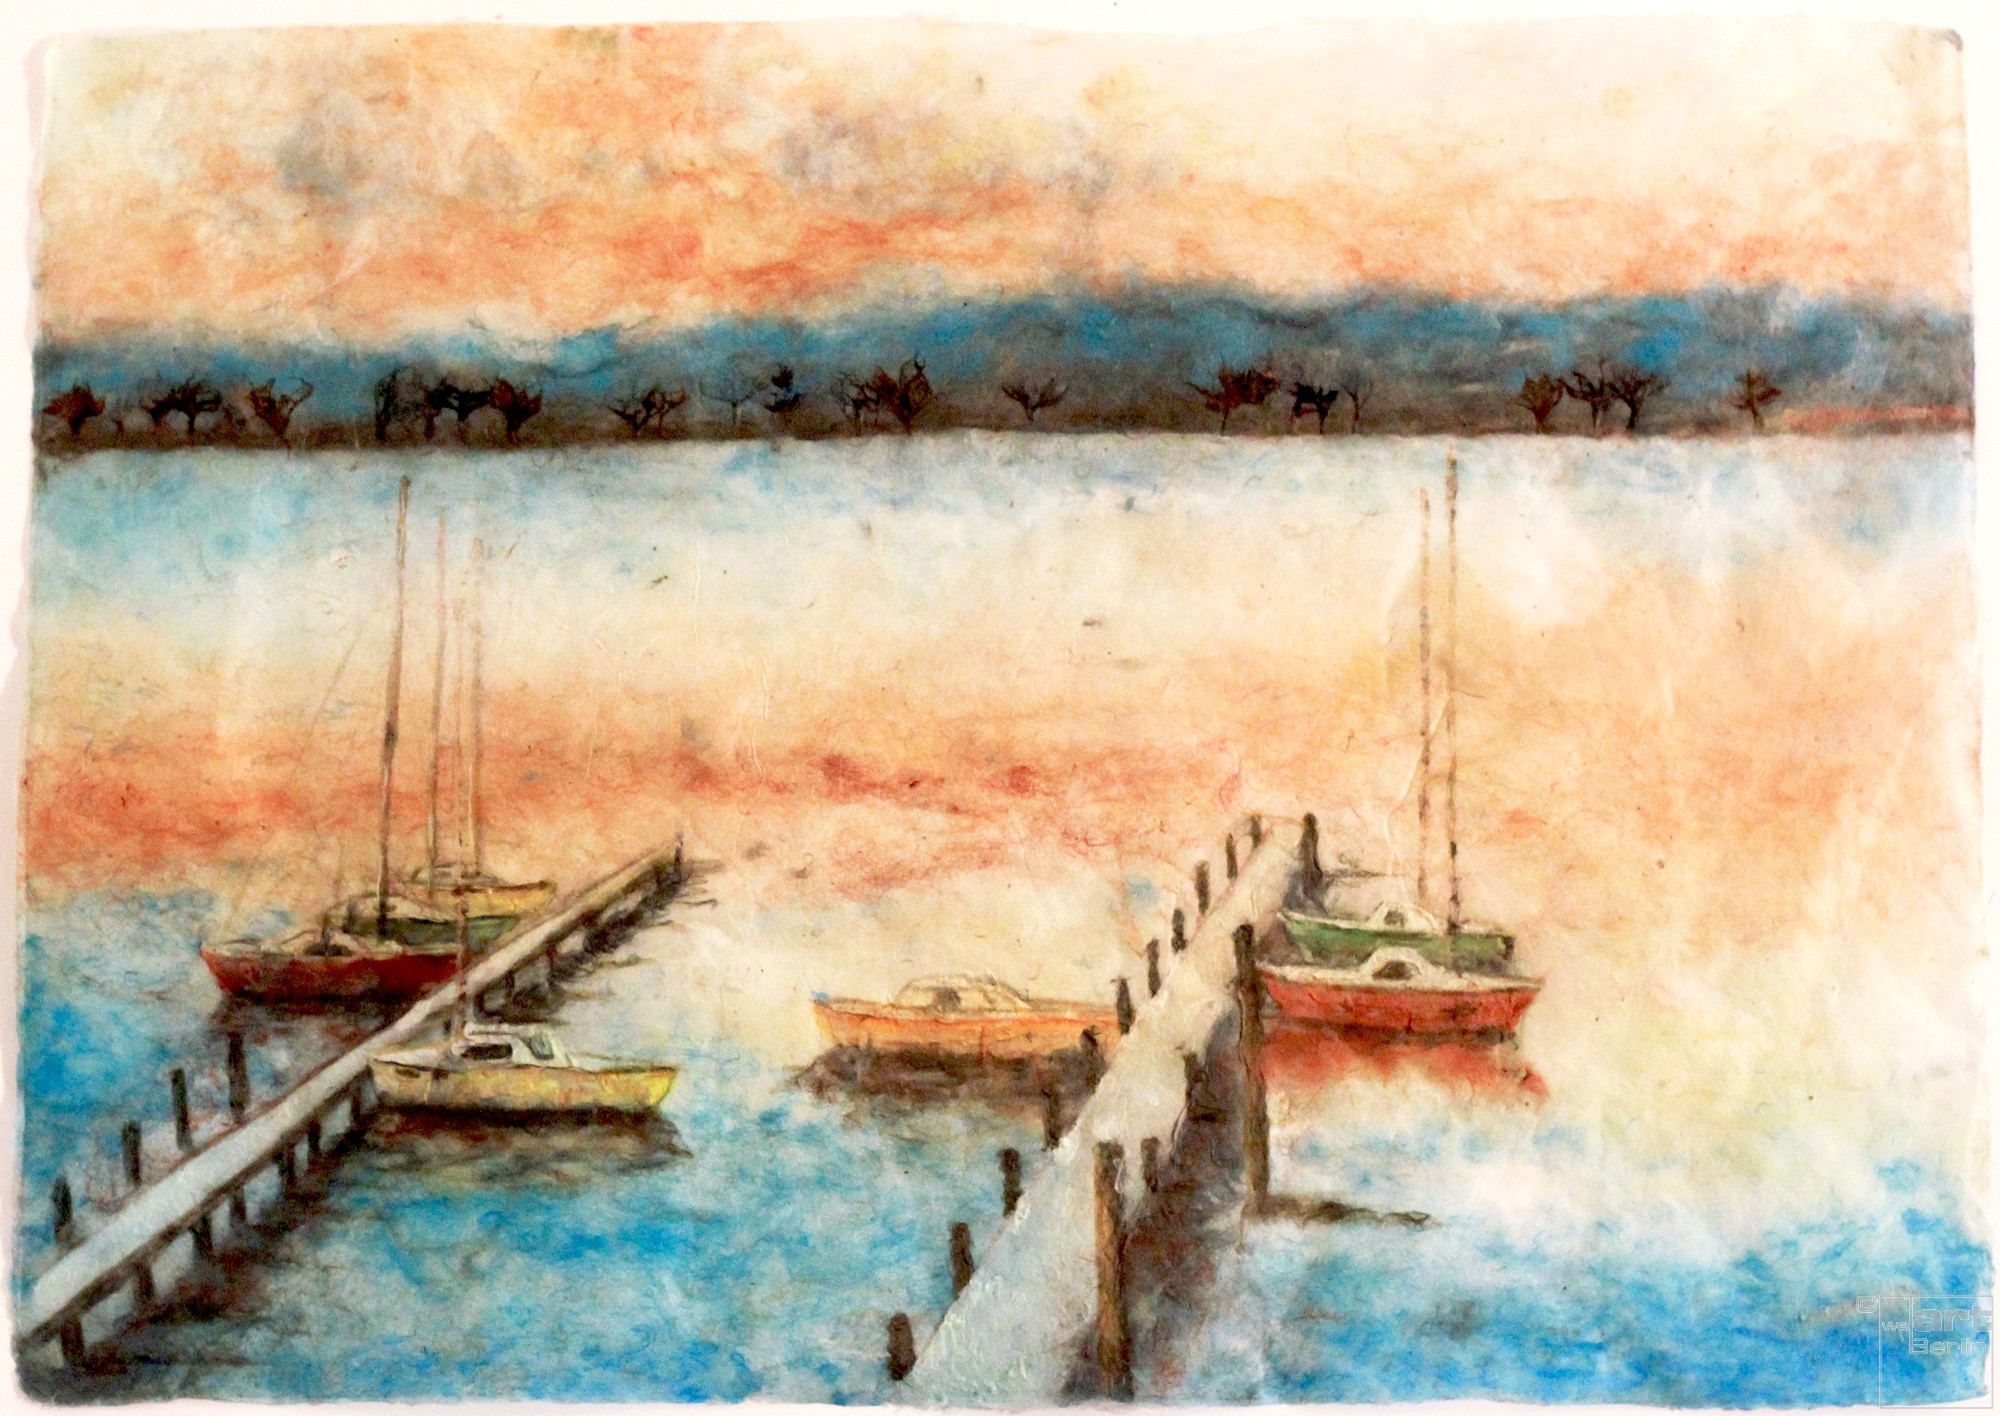 Boats on Wannsee | Painting by Simone Westphal | pulp painting, impressionist